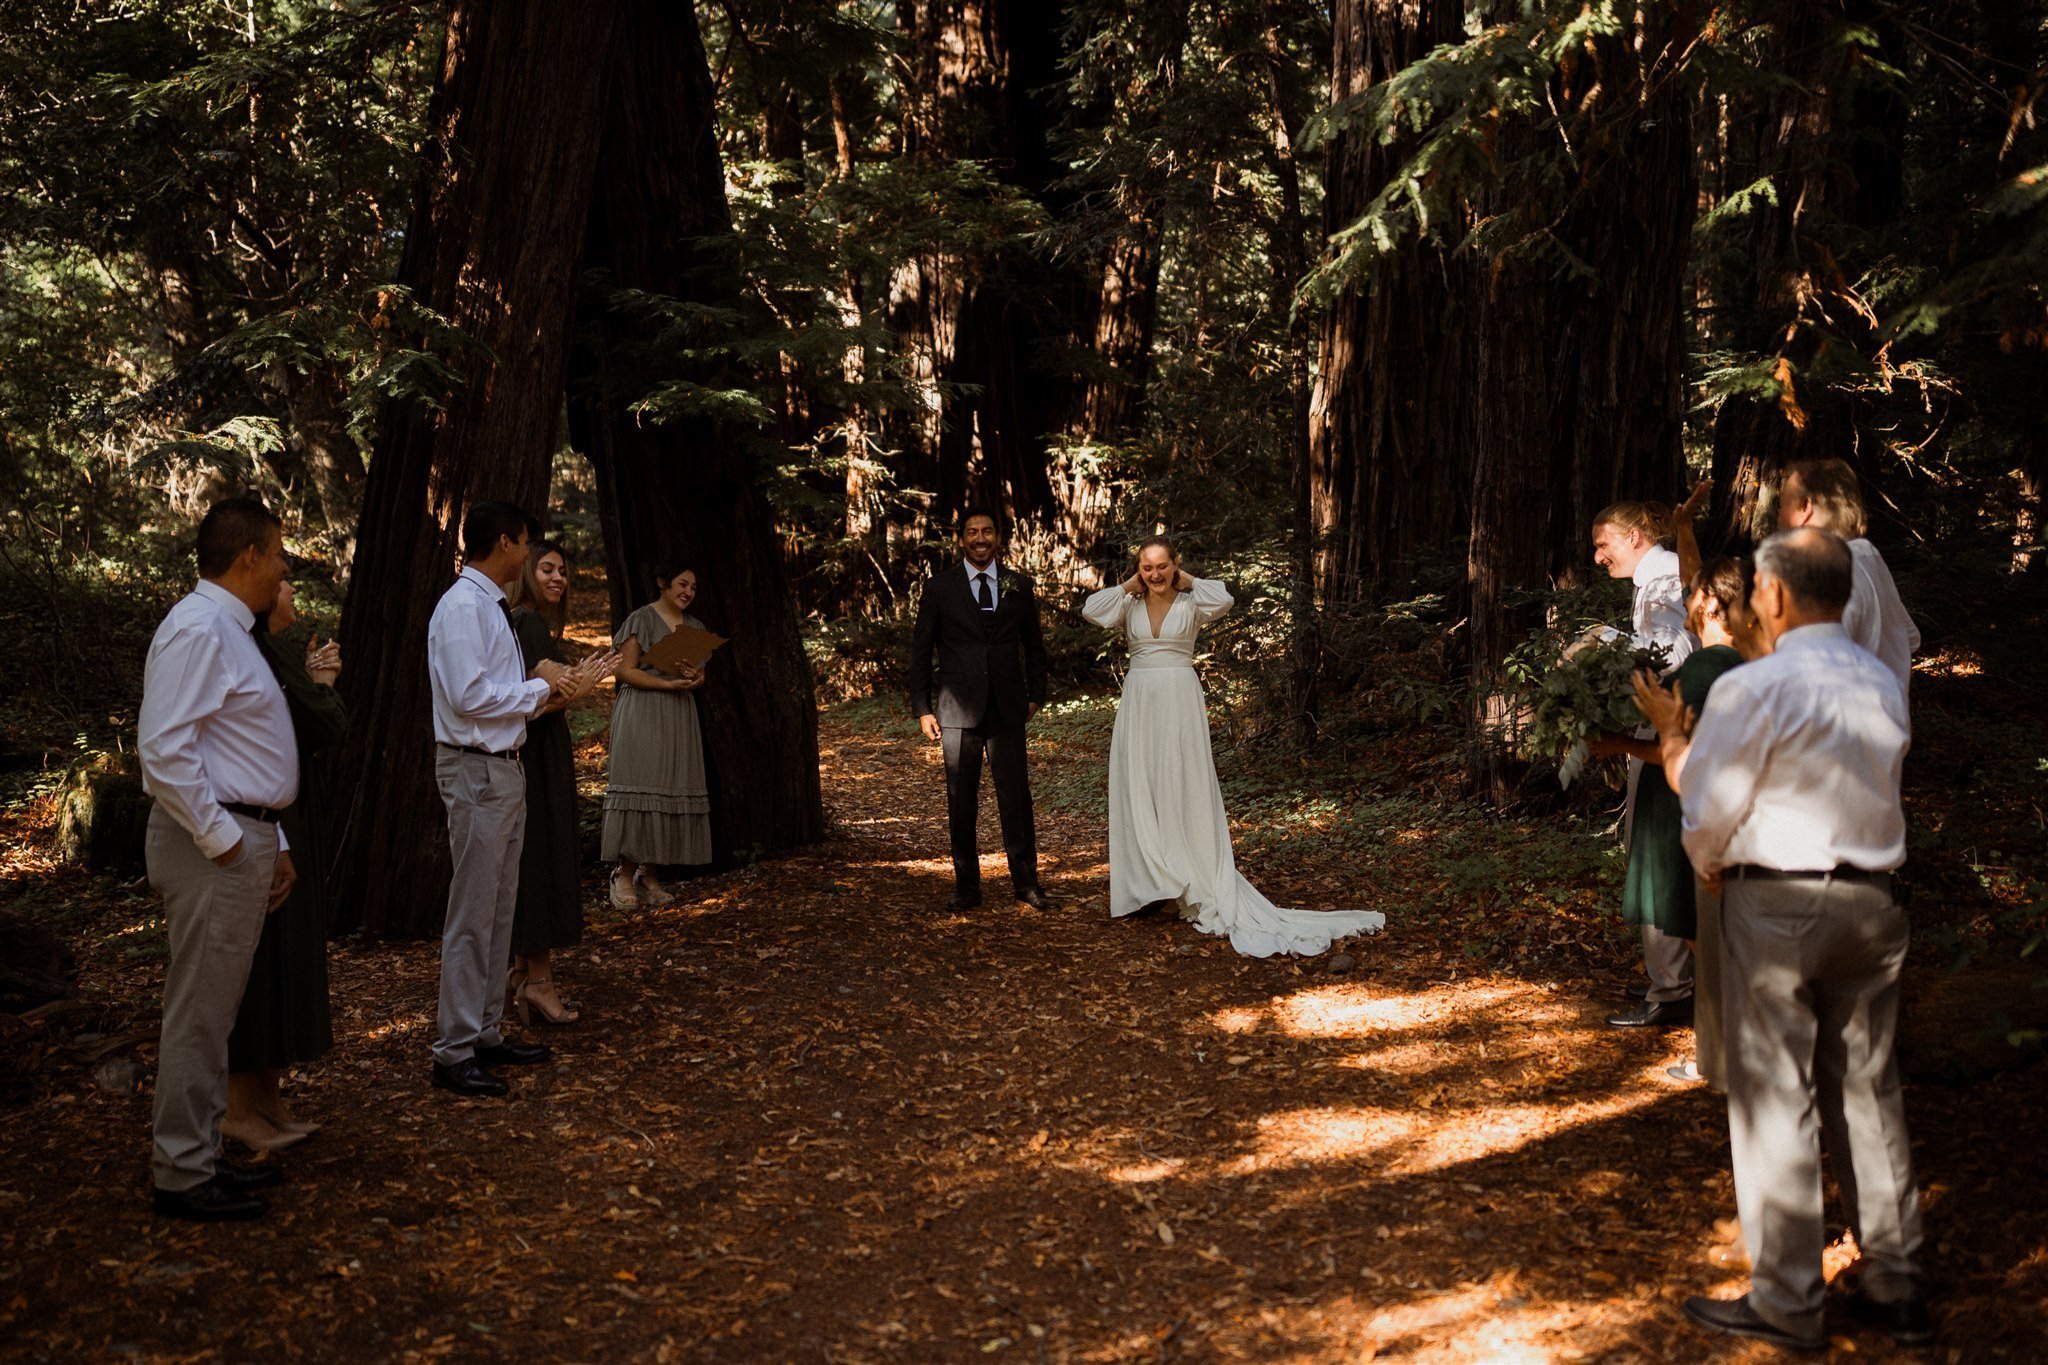 047_Two-Day Big Sur Redwoods Elopement with Family_Will Khoury Elopement Photographer.jpg